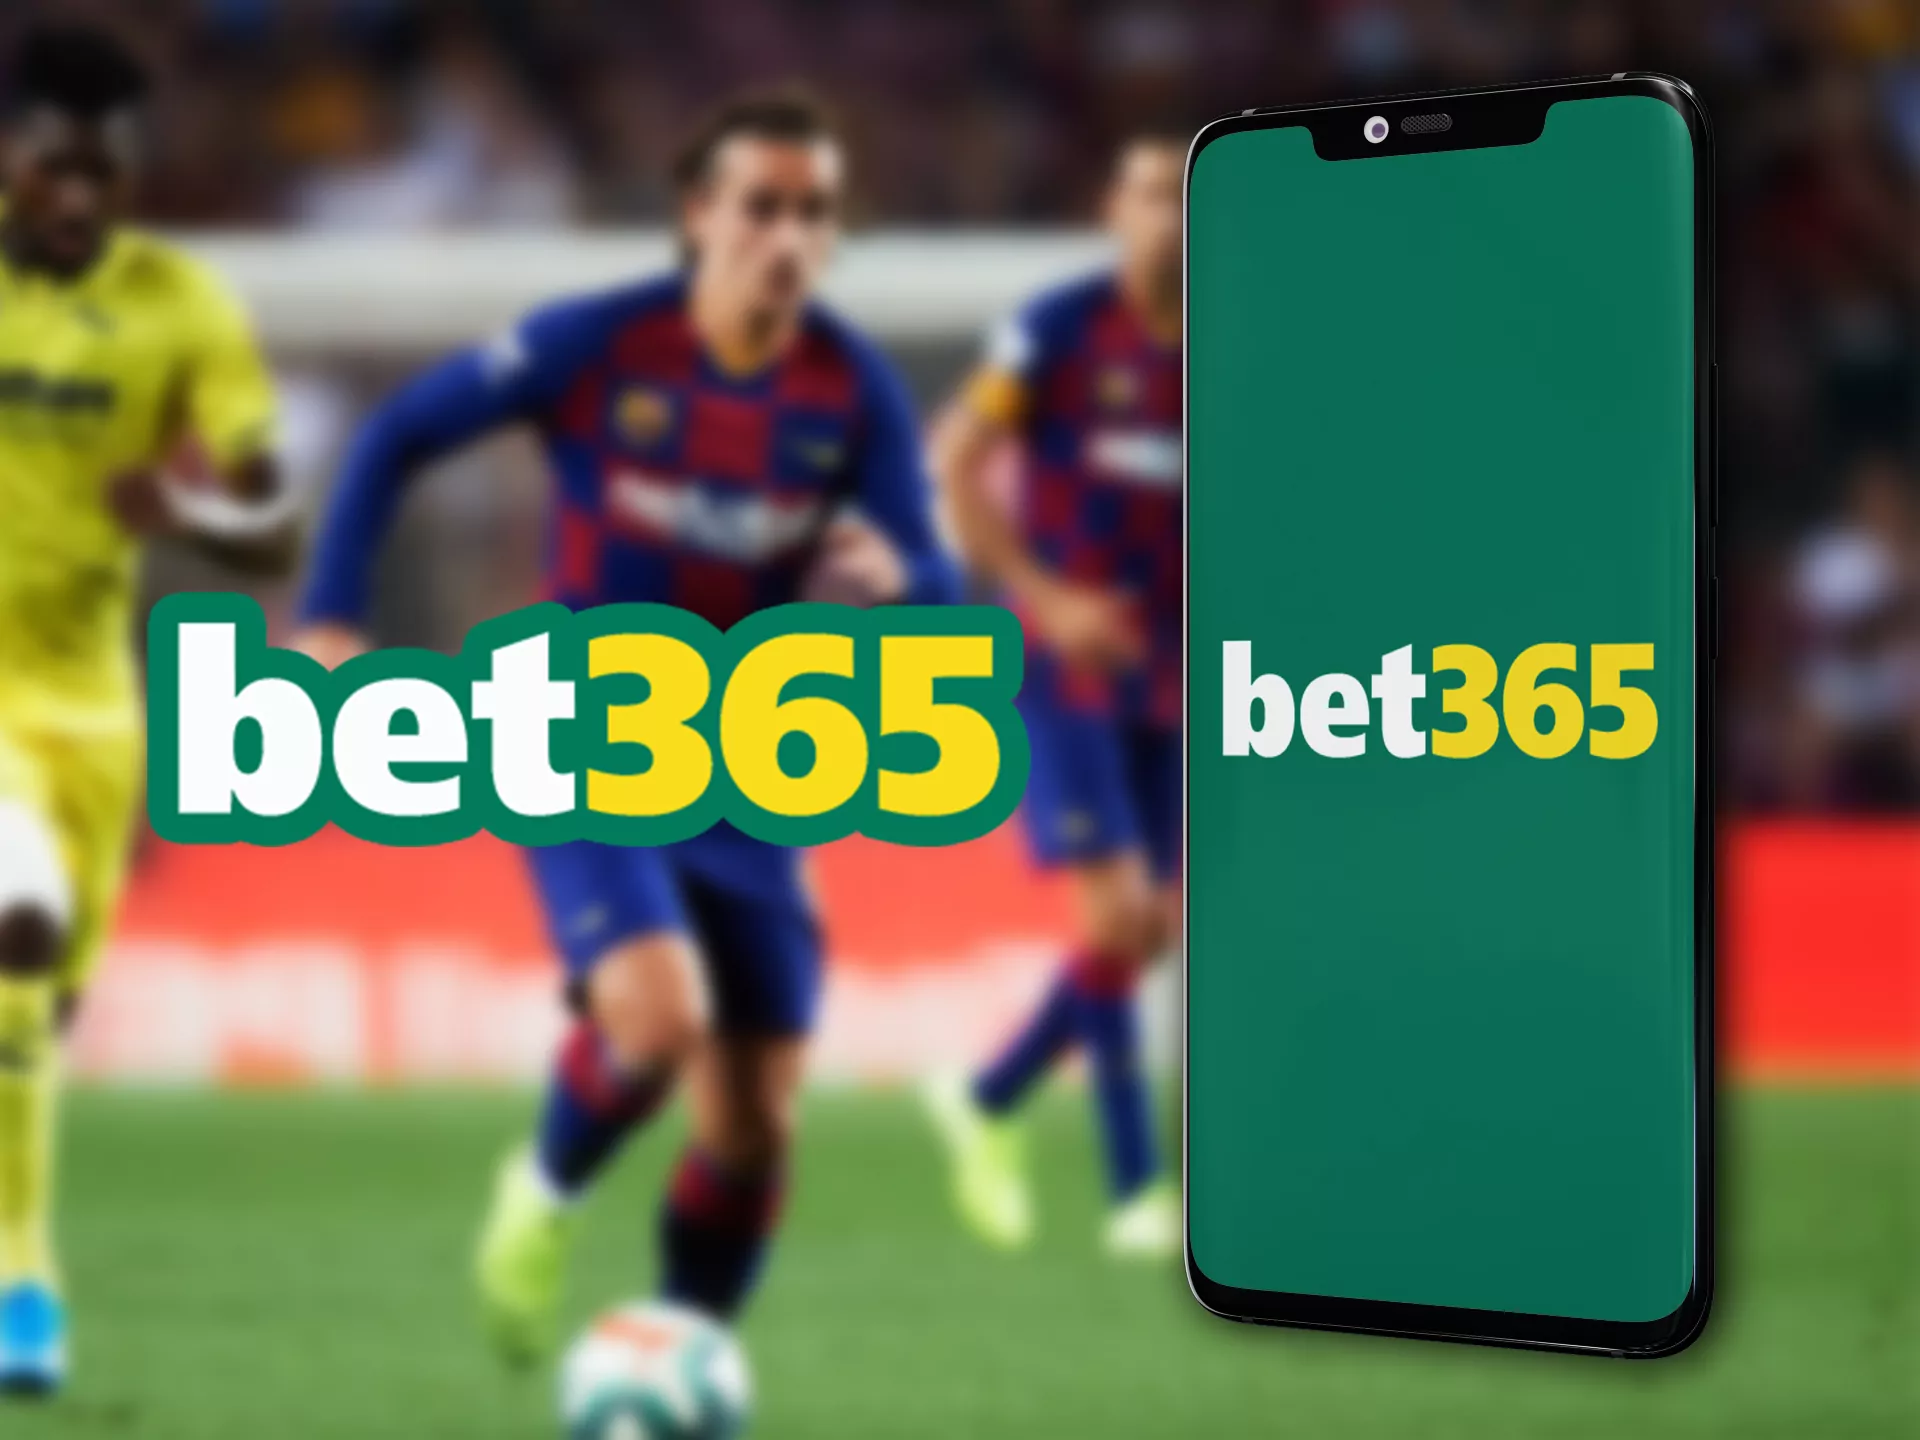 bet365 is a best soccer betting company.